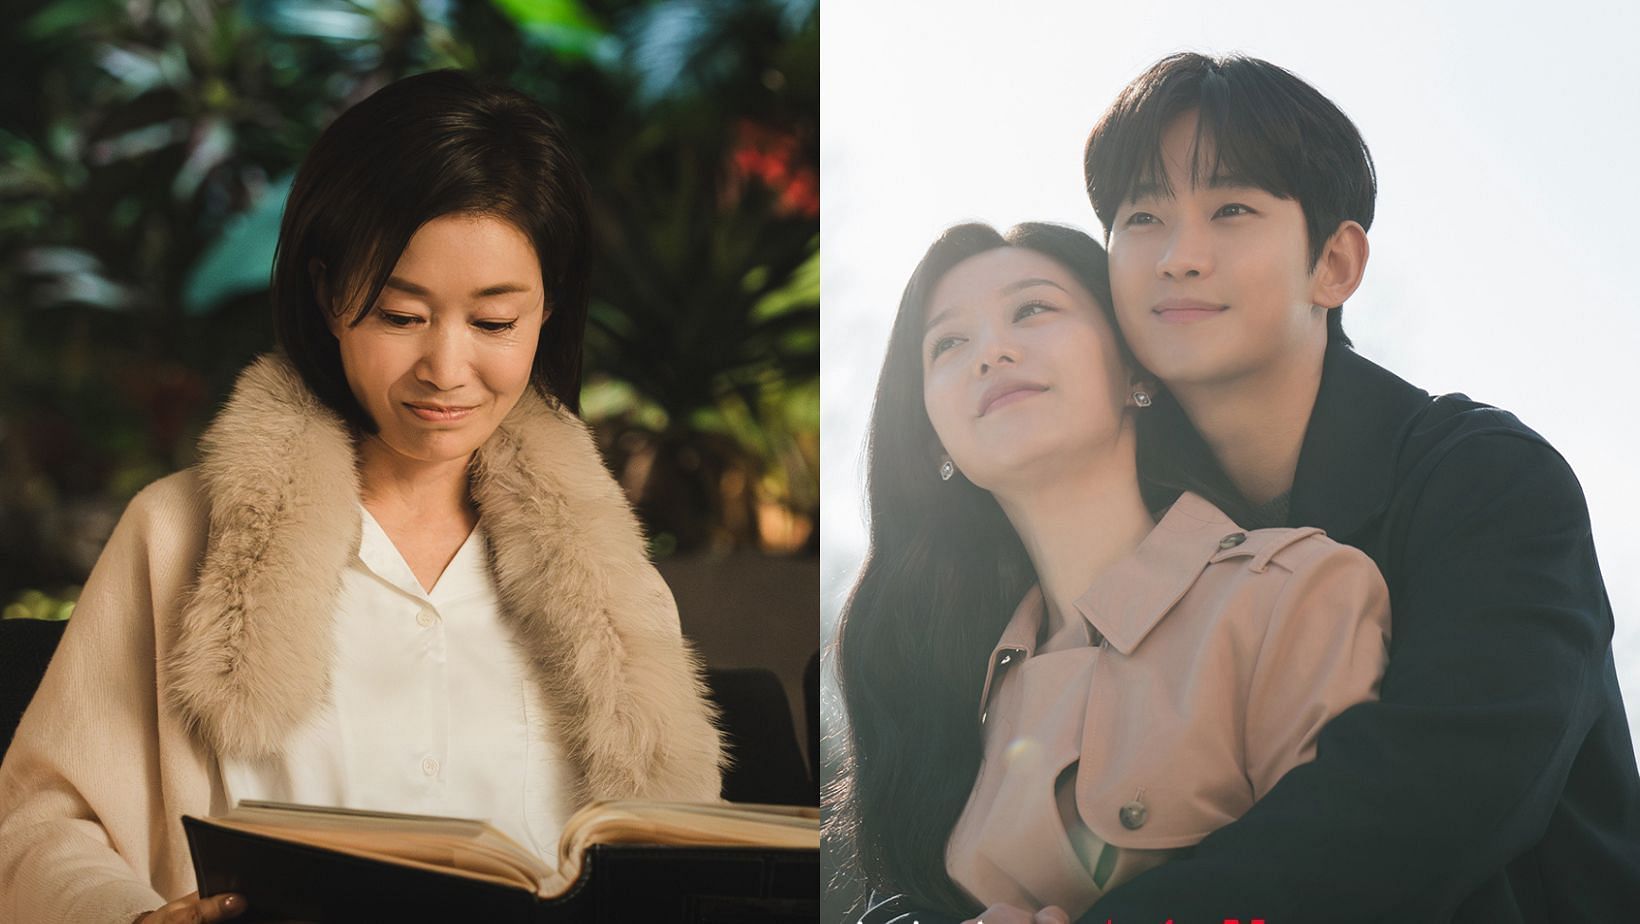 &lsquo;Queen Of Tears&rsquo; reward vacation has been canceled. (Images via X/@CJnDrama)